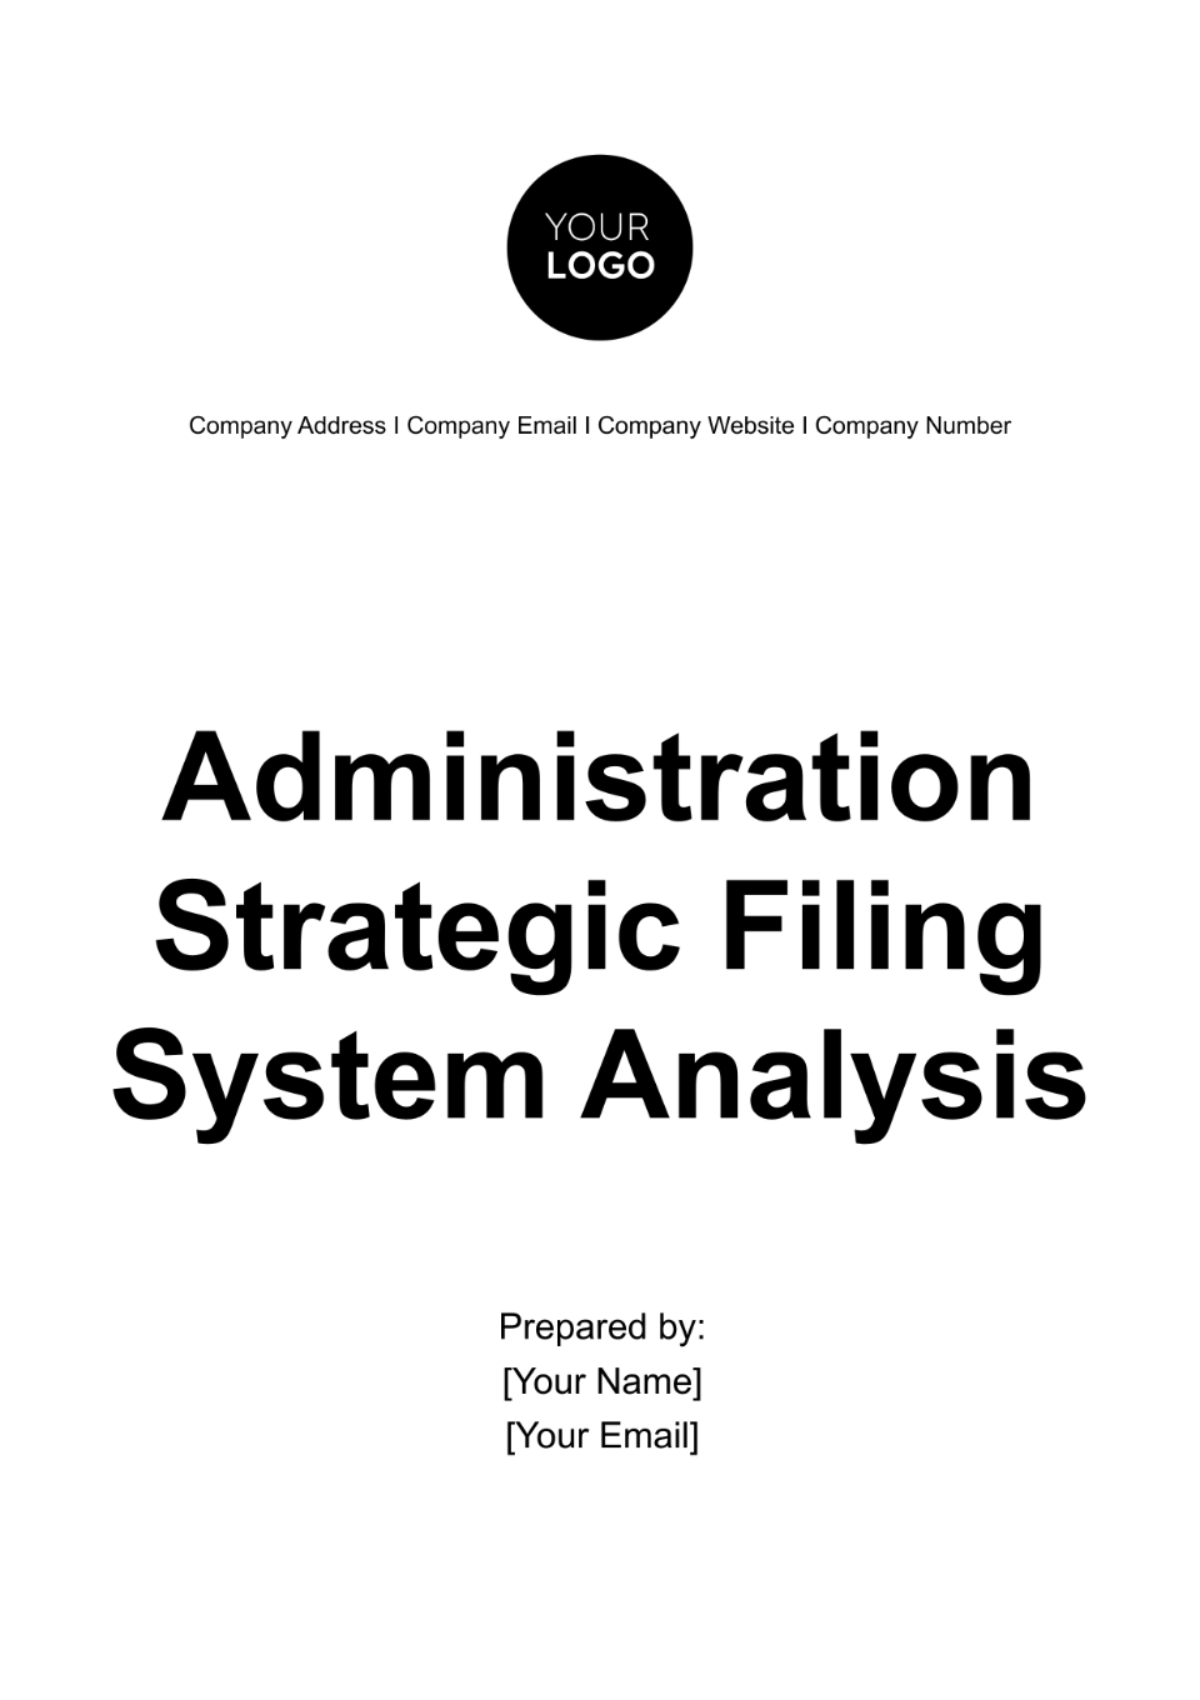 Administration Strategic Filing System Analysis Template